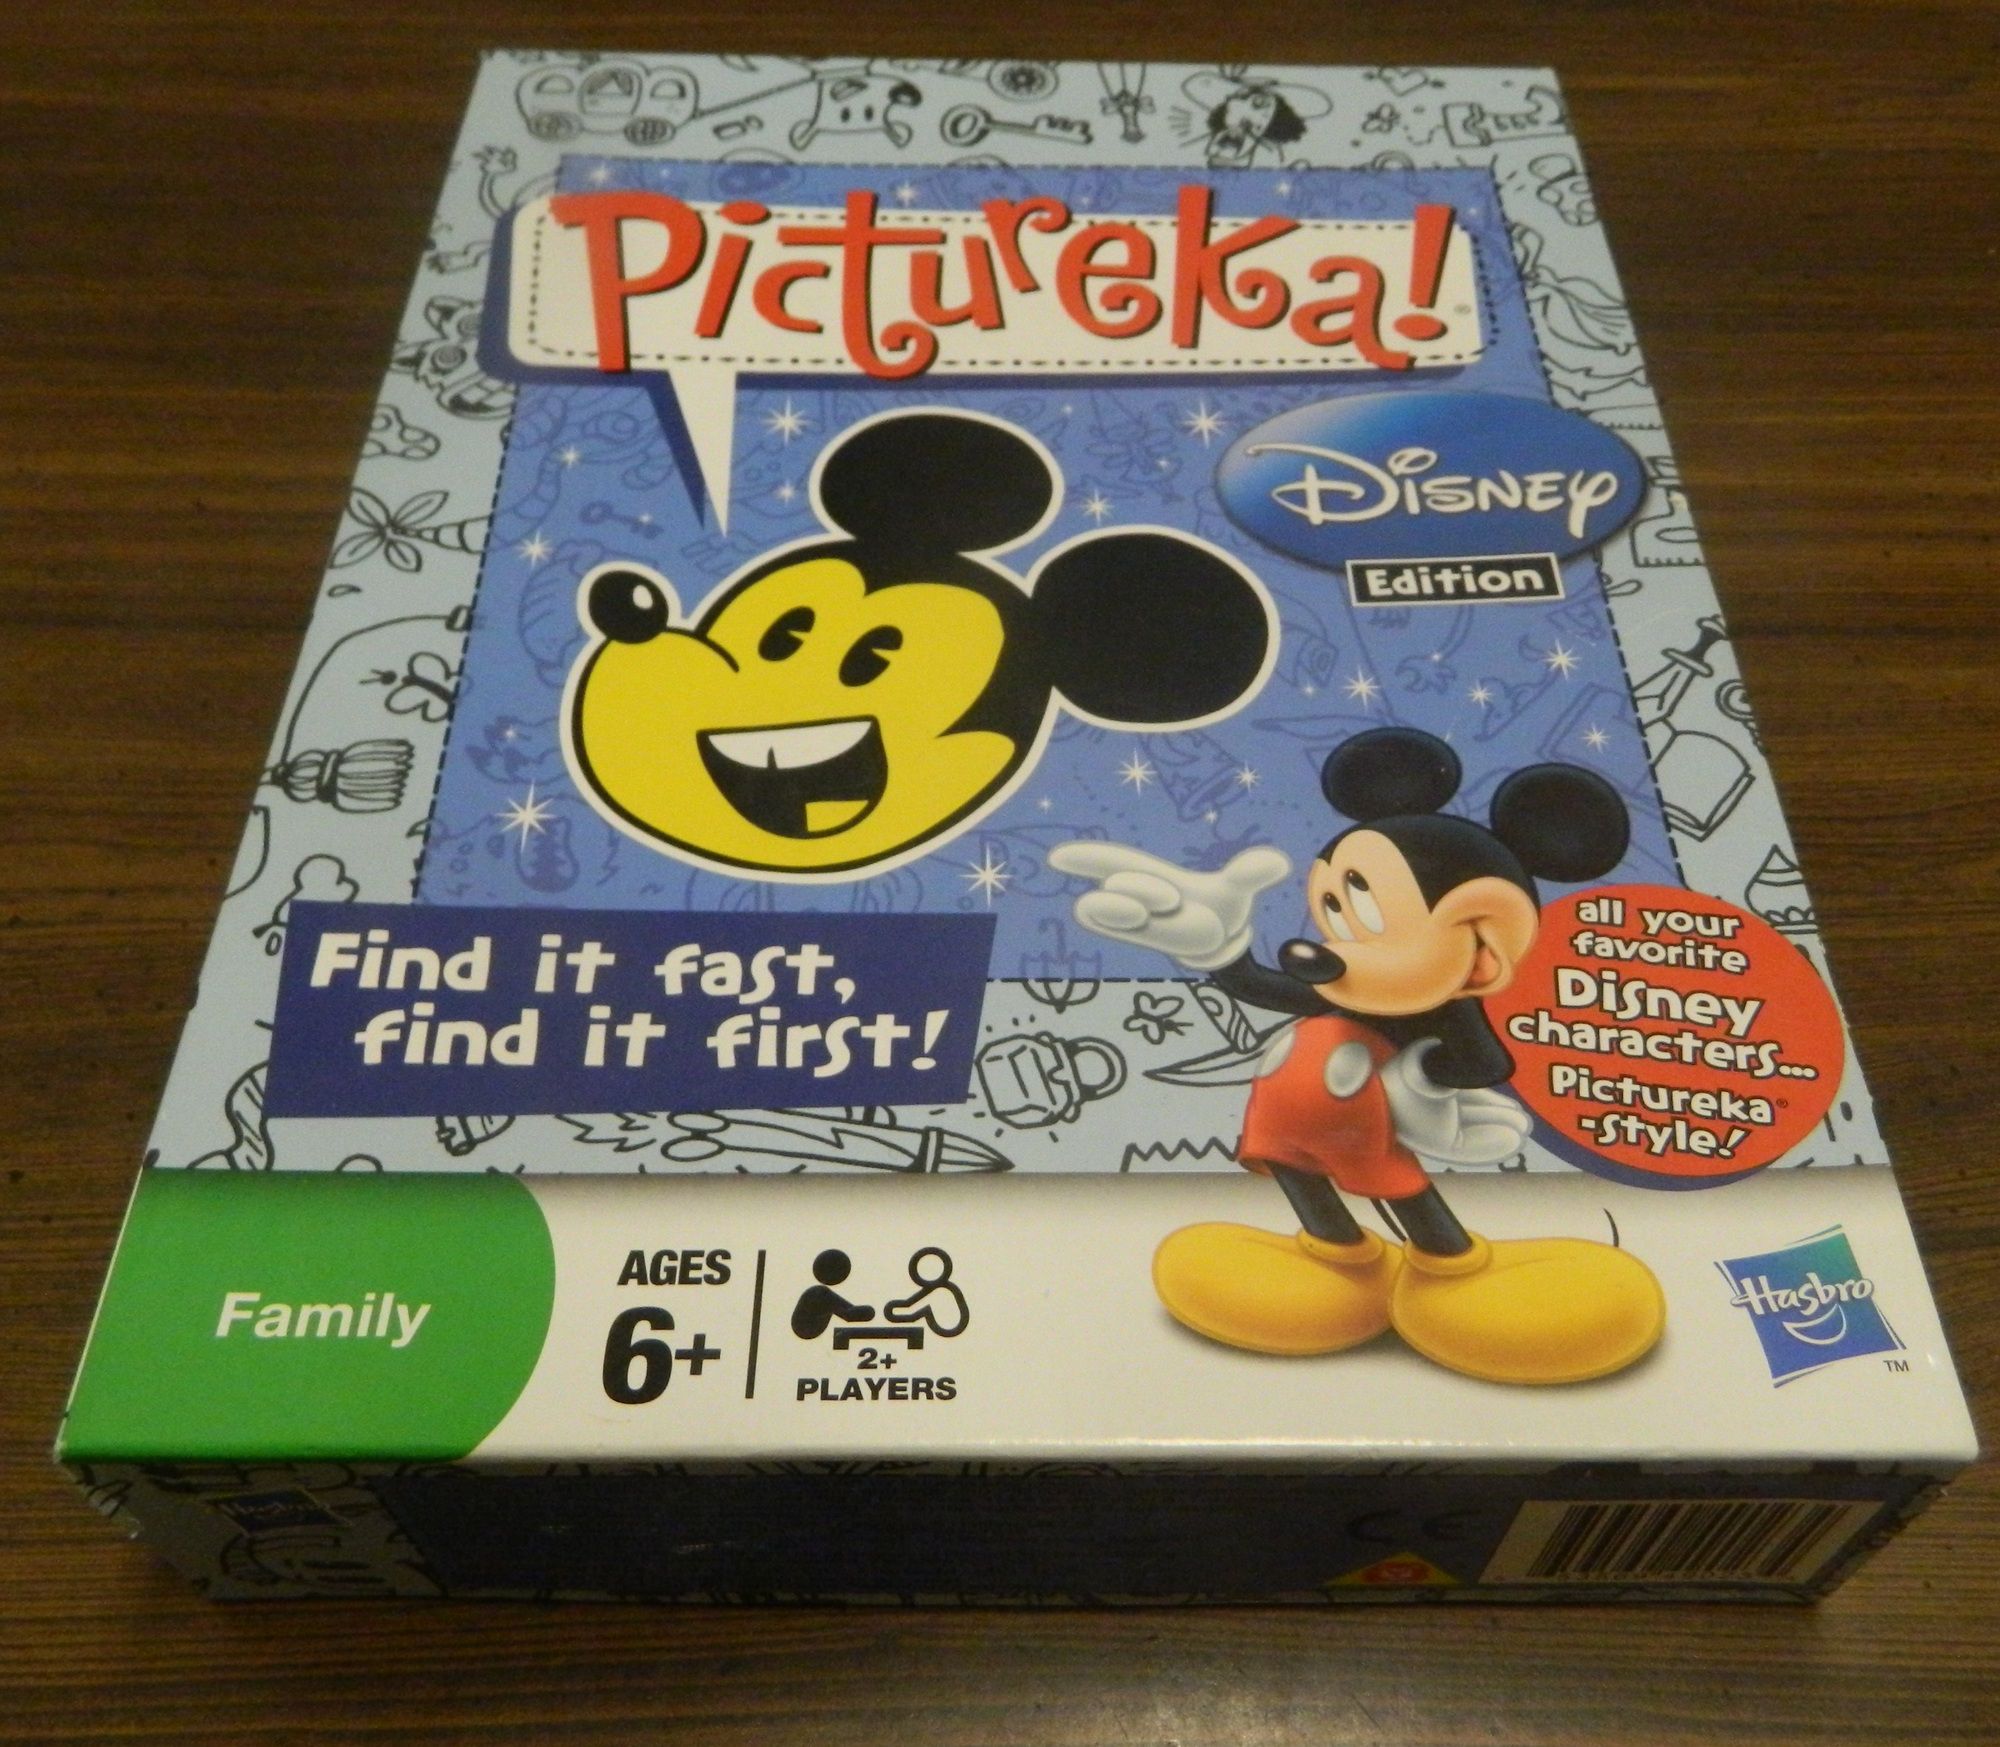 Pictureka! Disney Edition Board Game Review and Rules